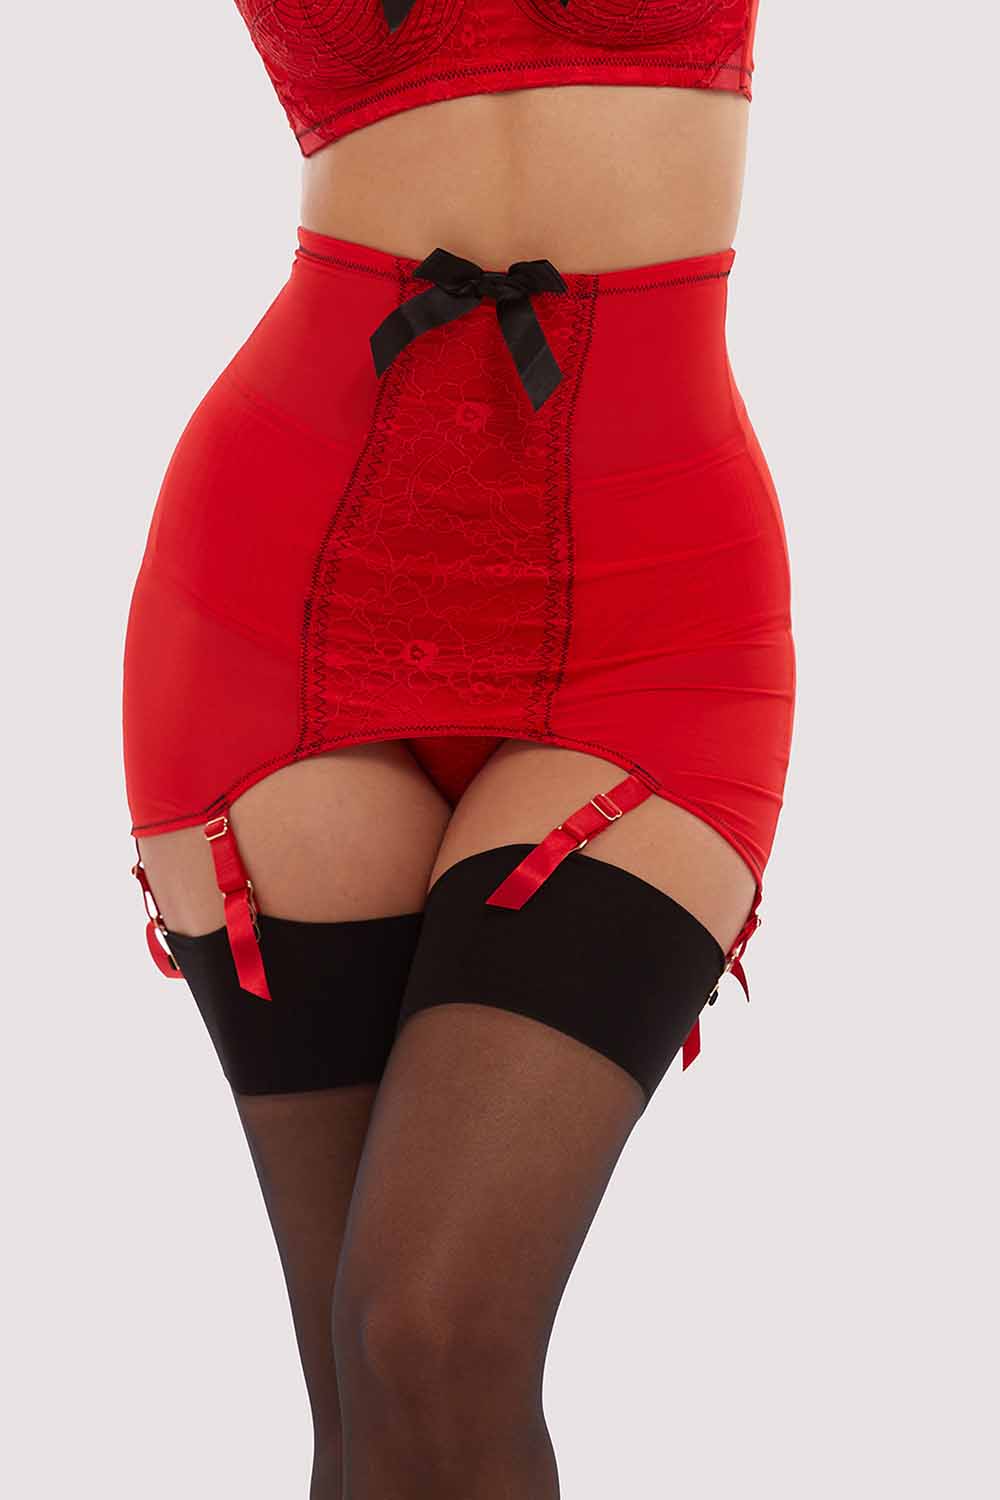 Elsie Lace Girdle Red